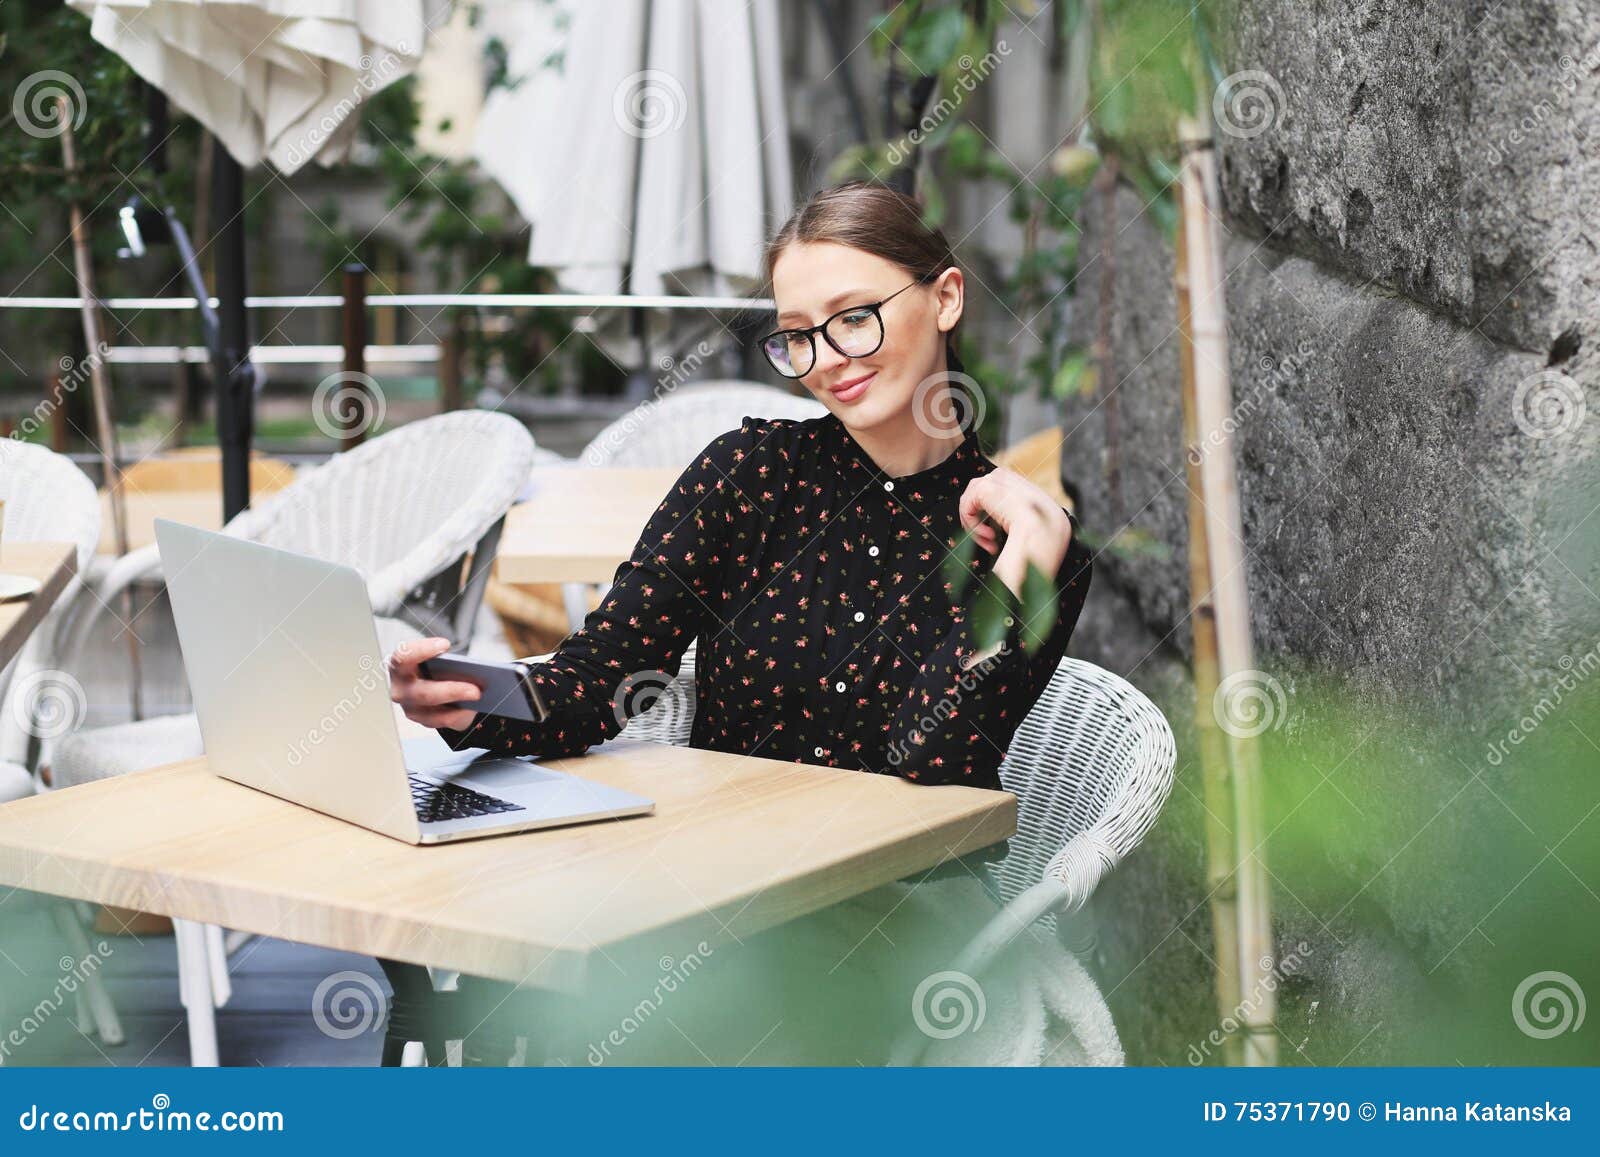 Women is Wearing Glasses and Black Shirt in the Cafe Stock Photo ...